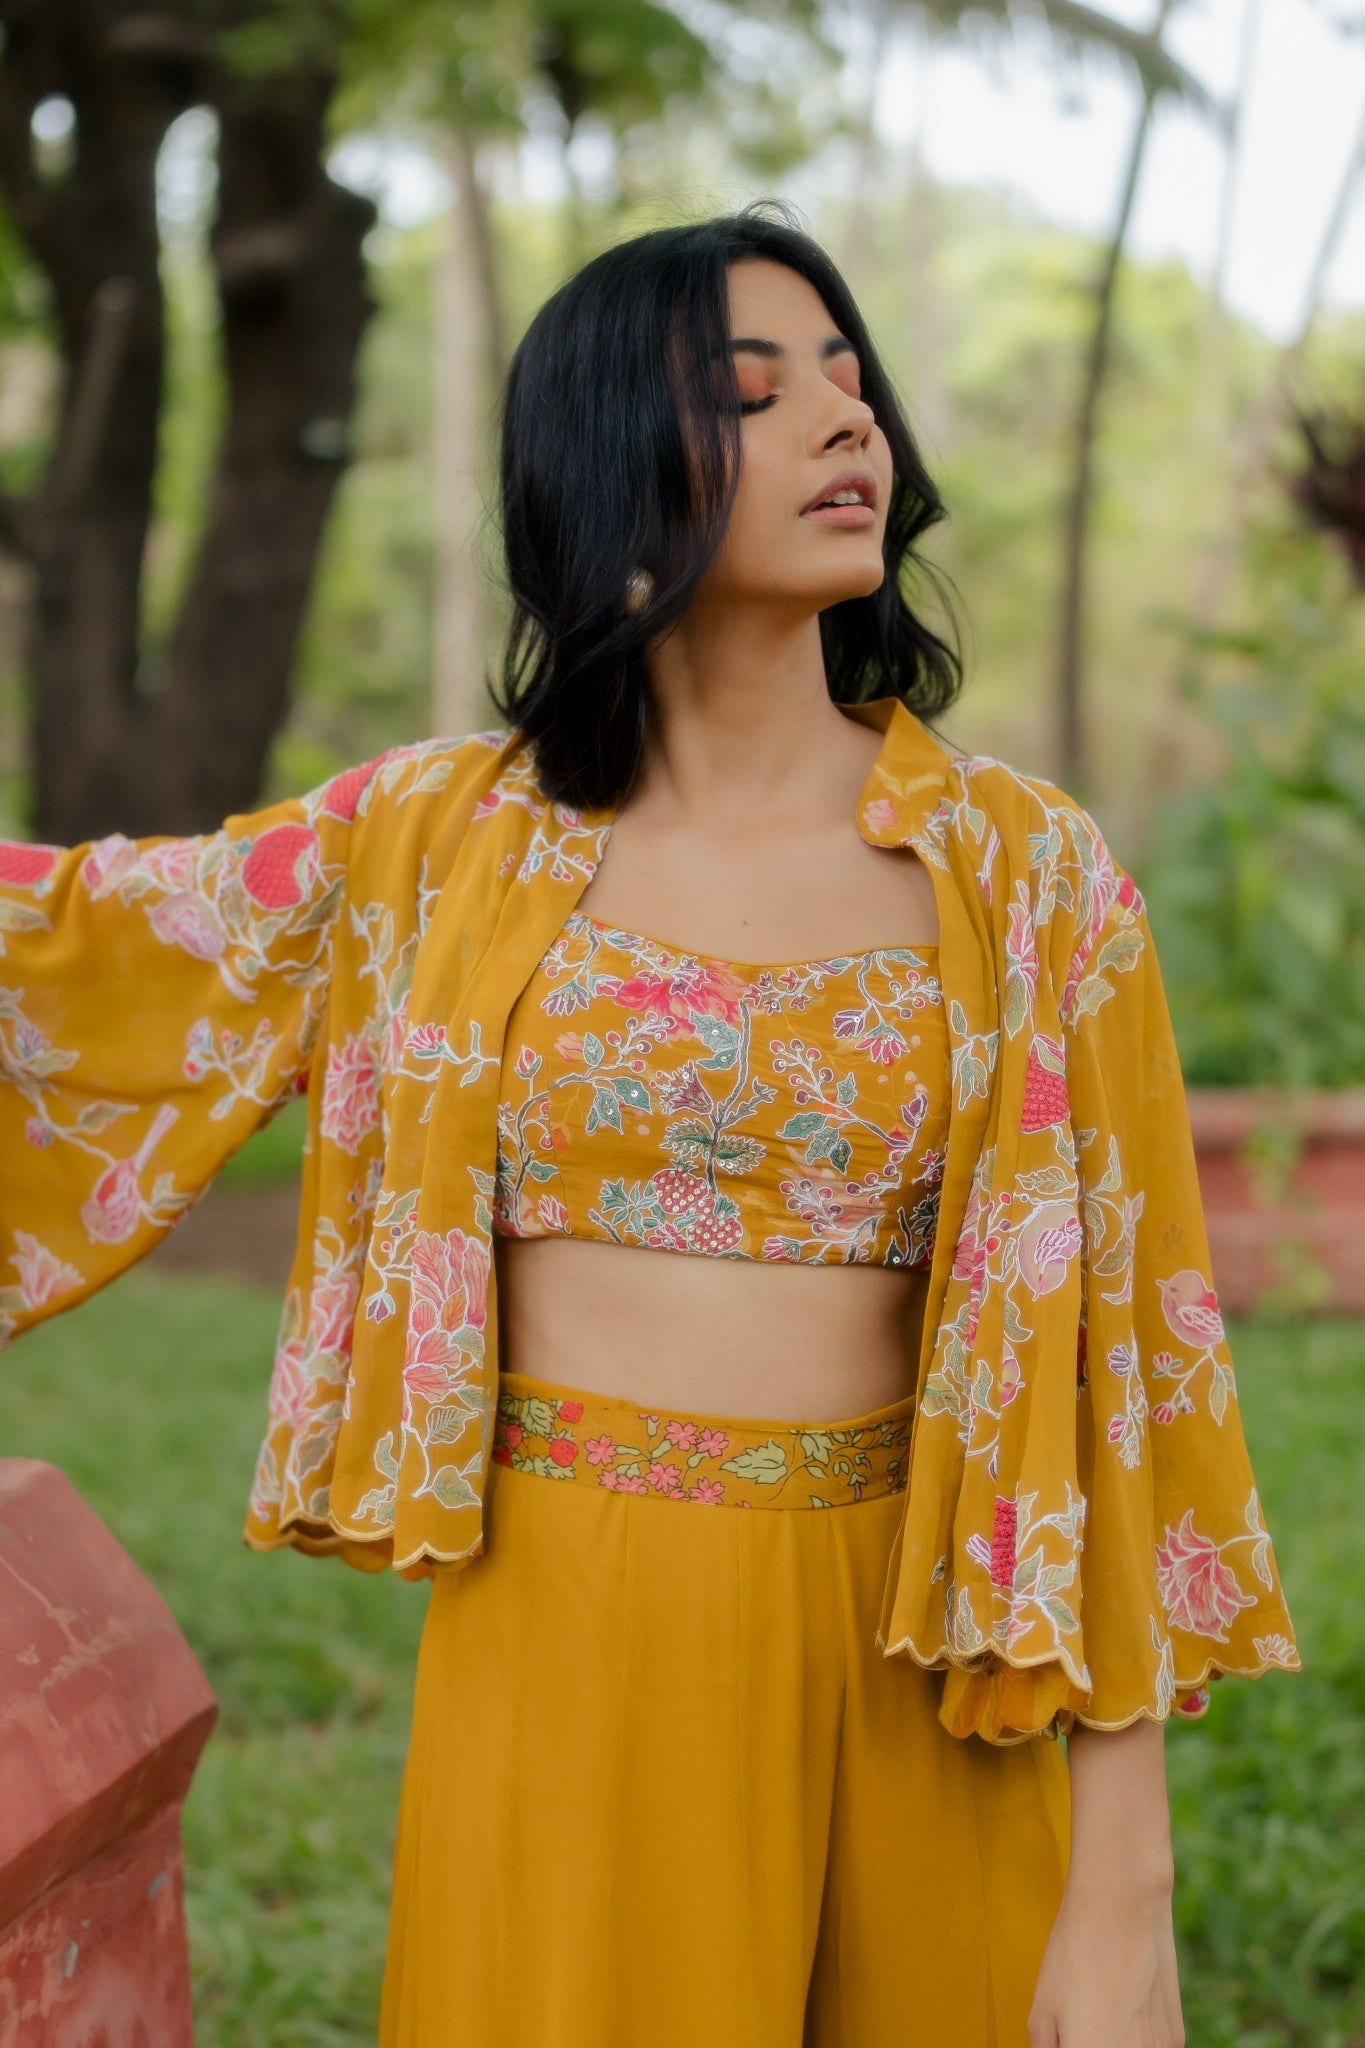 Floral and Anar Print Ochre Yellow Set